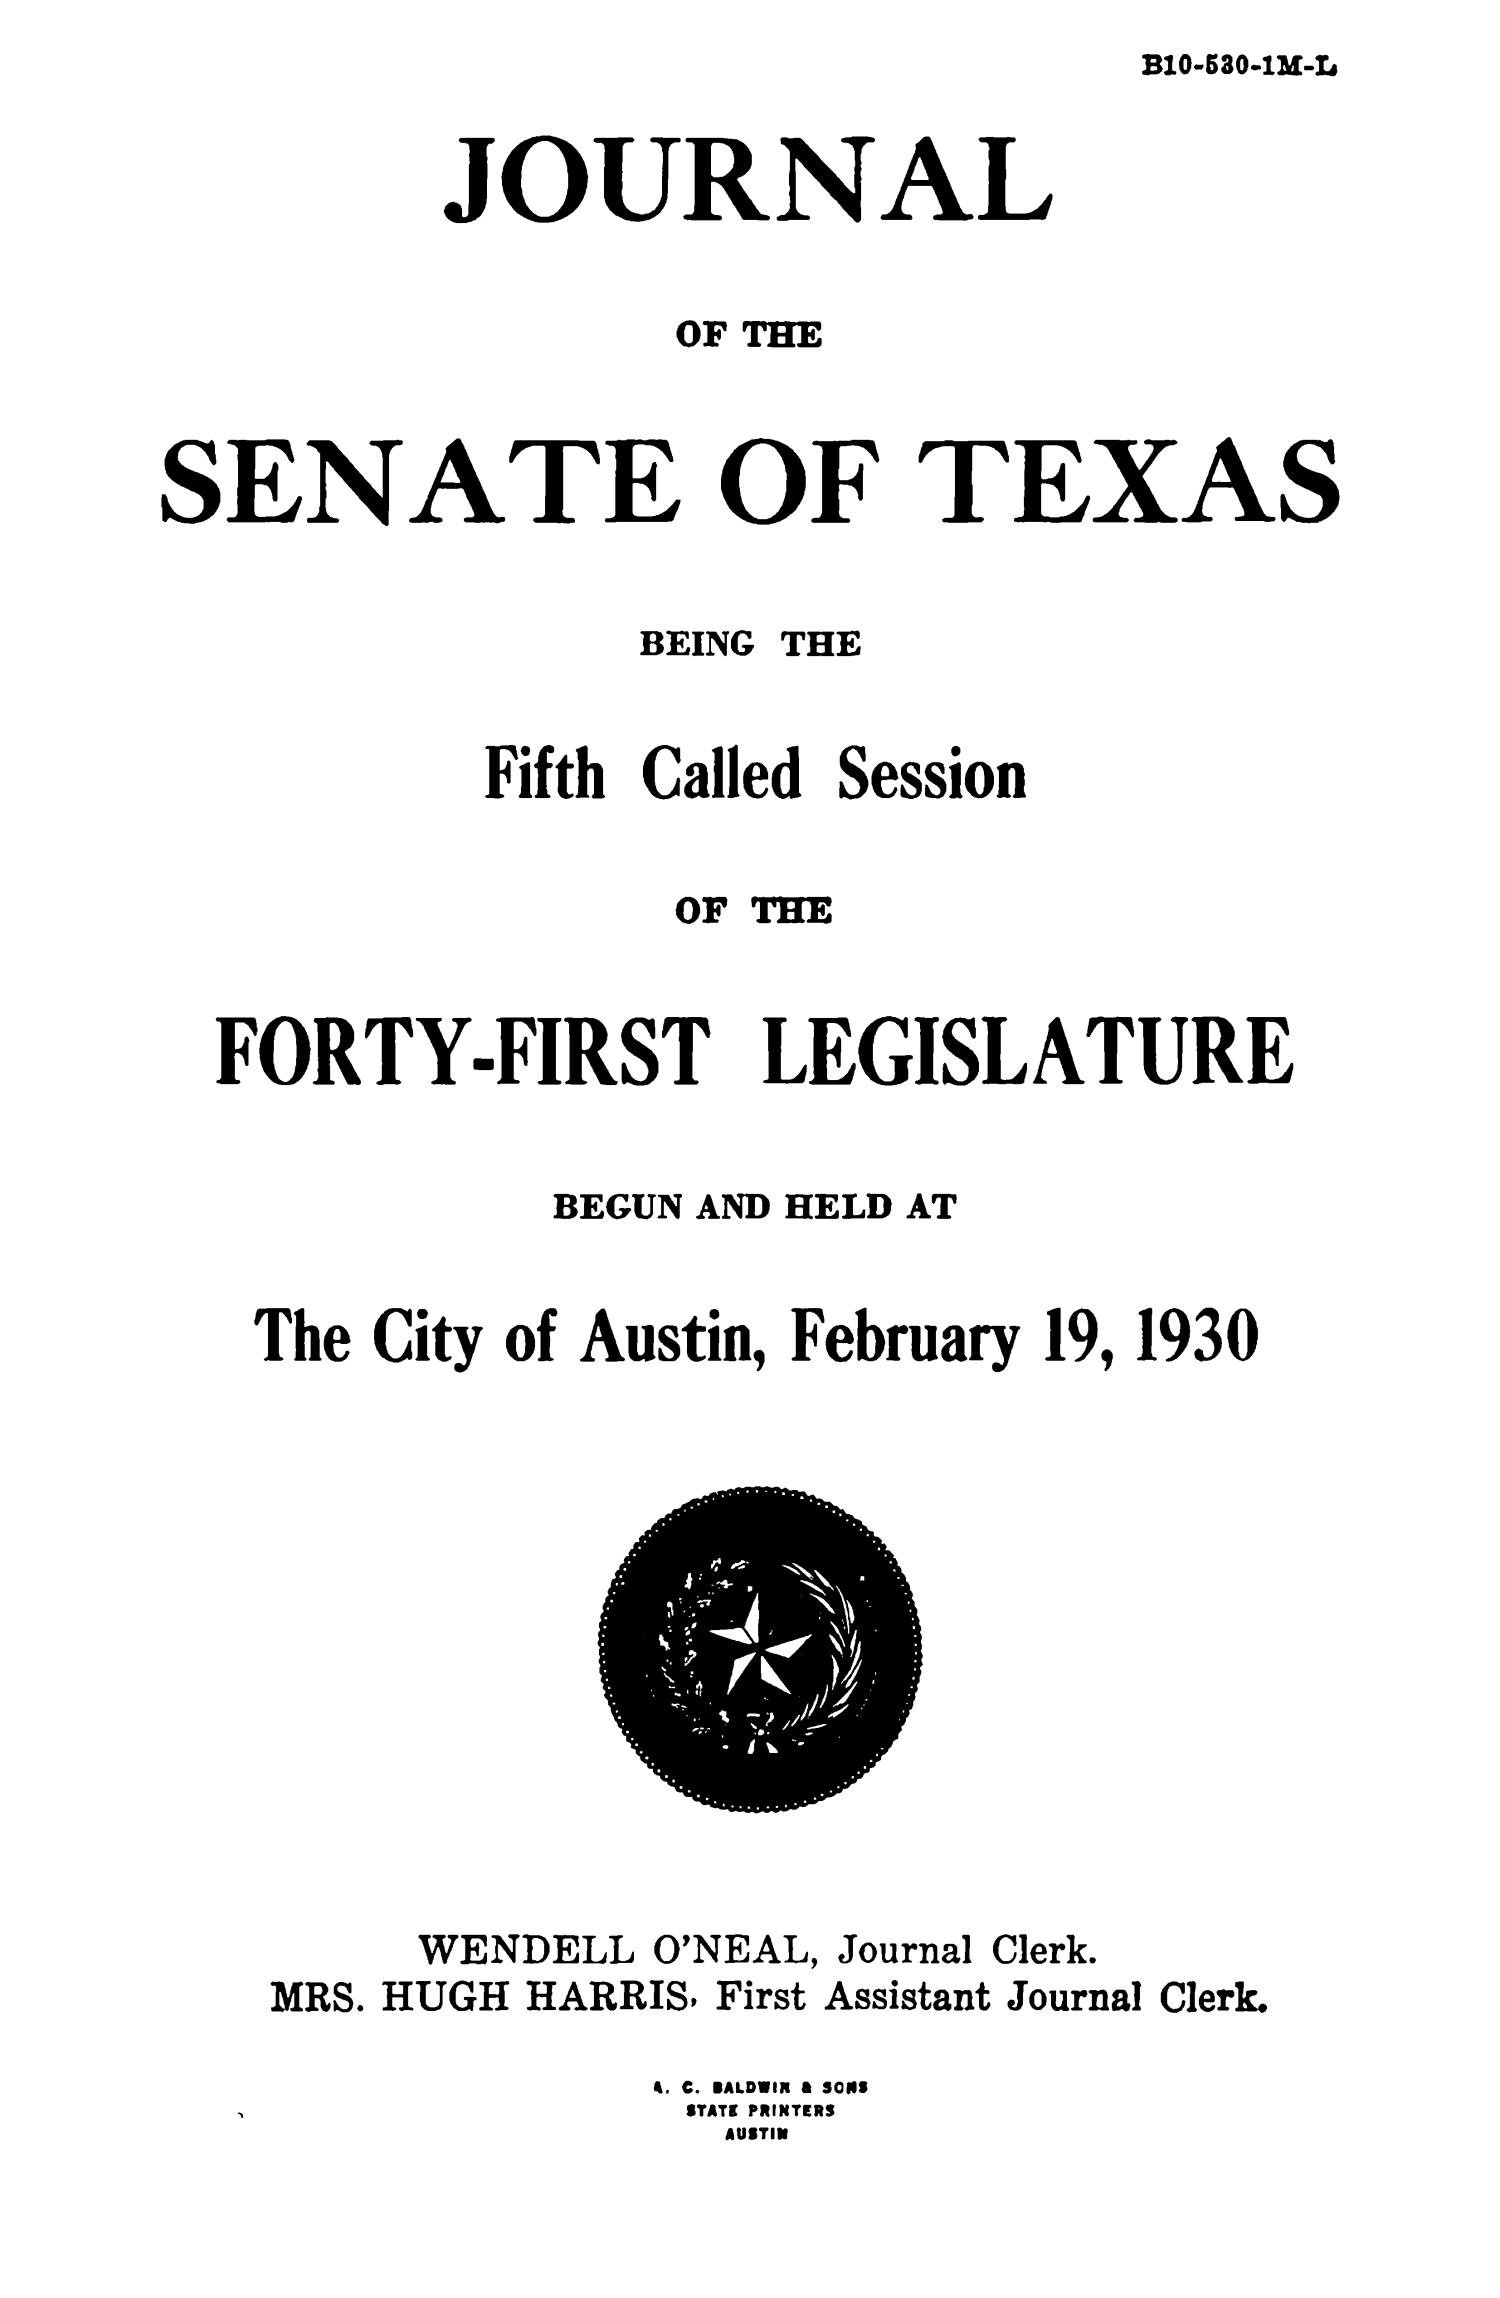 Journal of the Senate of Texas being the Fifth Called Session of the Forty-First Legislature
                                                
                                                    Title Page
                                                